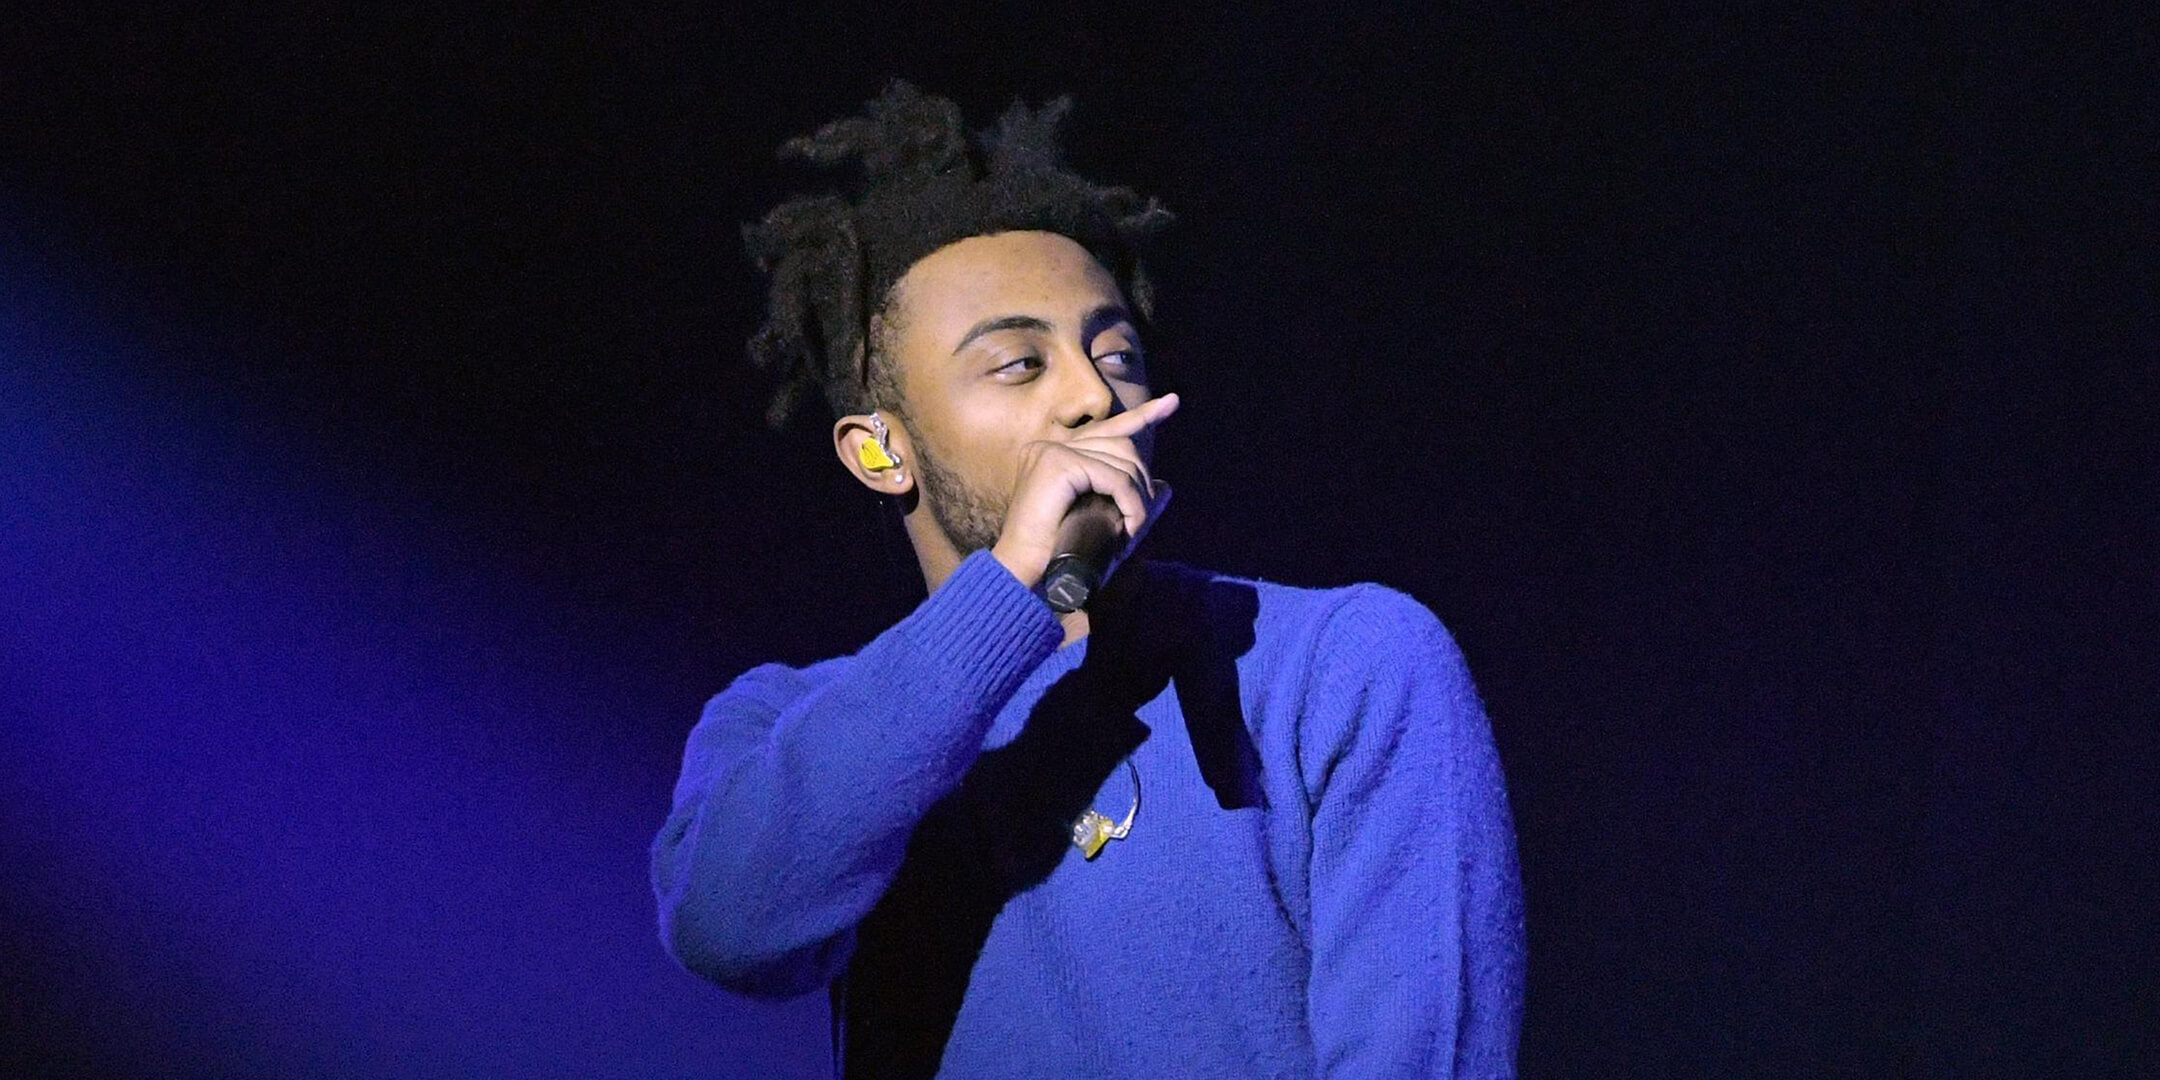 Amine tickets, Vivid Seats, Concert admission, Live music experience, 2160x1080 Dual Screen Desktop